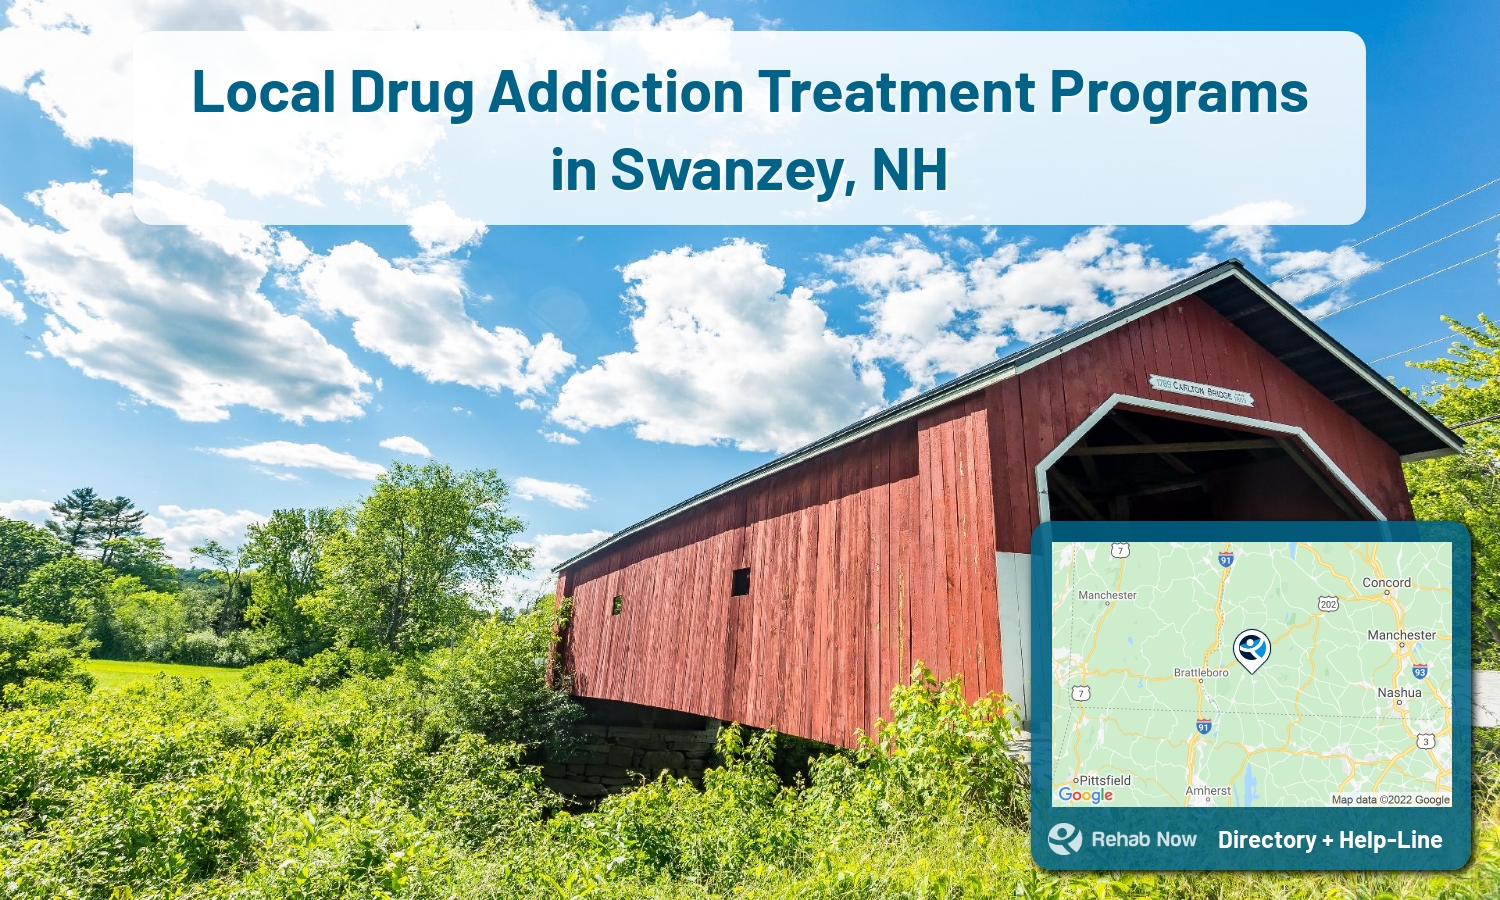 Drug rehab and alcohol treatment services nearby Swanzey, NH. Need help choosing a treatment program? Call our free hotline!